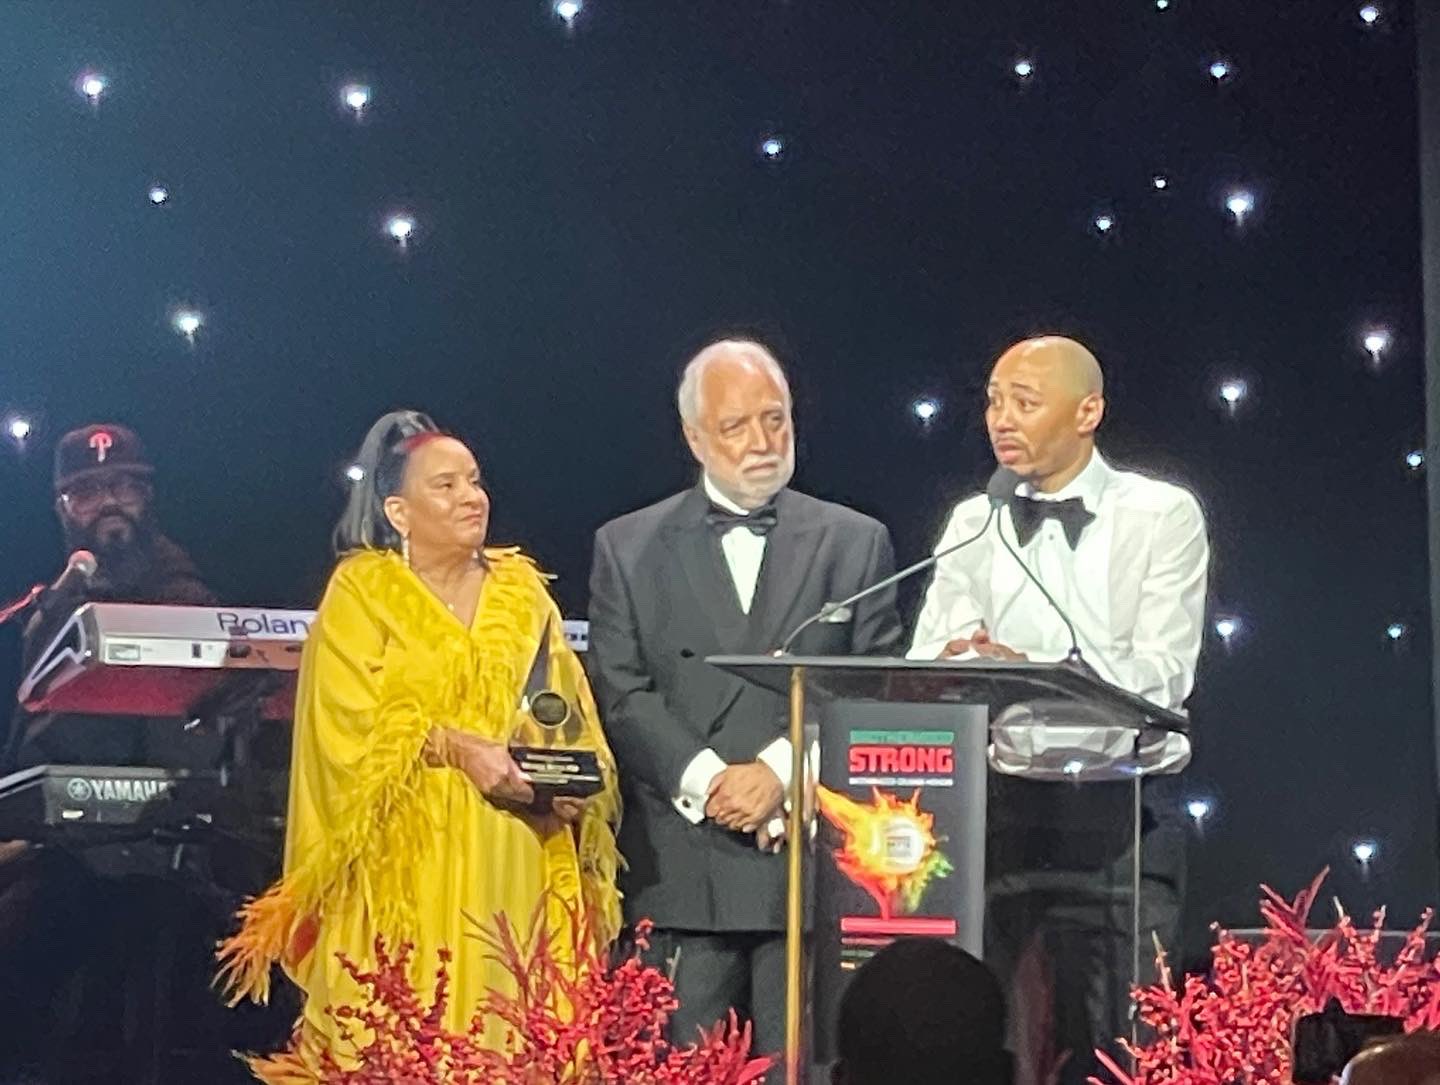 Mookie Betts received the Pioneer of African American Achievement Award from the Brotherhood Crusade in a gala in Beverly Hills on Friday, December 9, 2022.